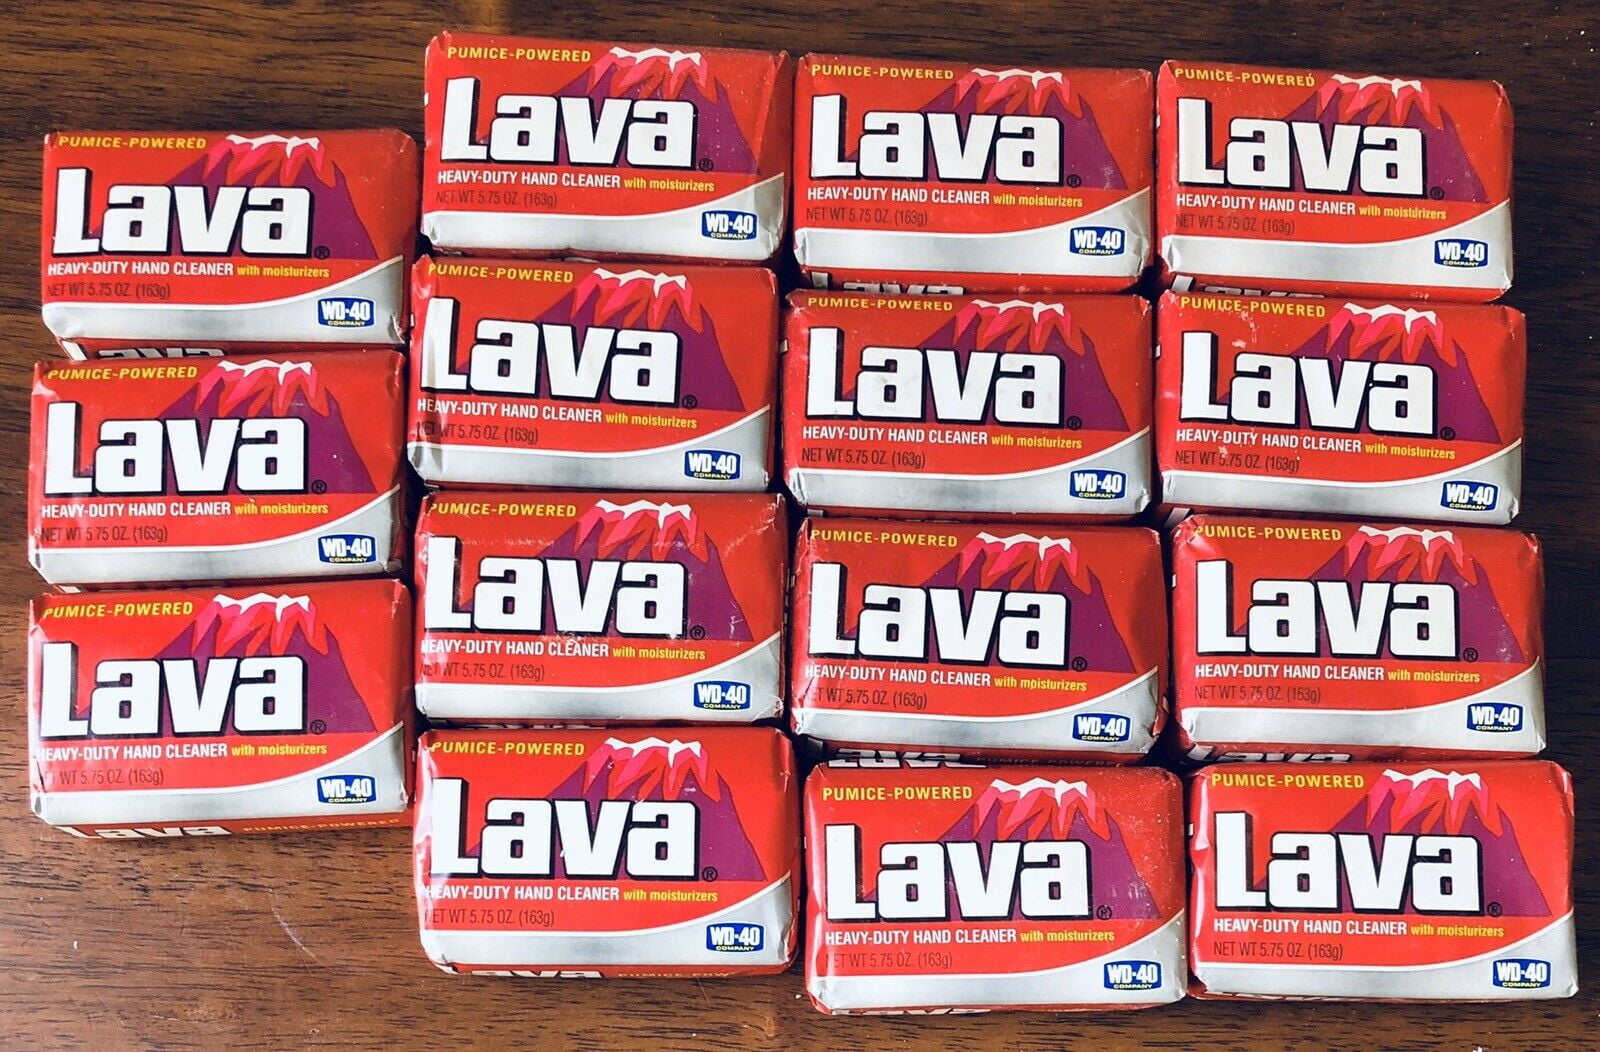 WD-40 Lava Soap Heavy-duty Hand Cleaner Pumice Powered 5.75 Oz Bar (15 pack)